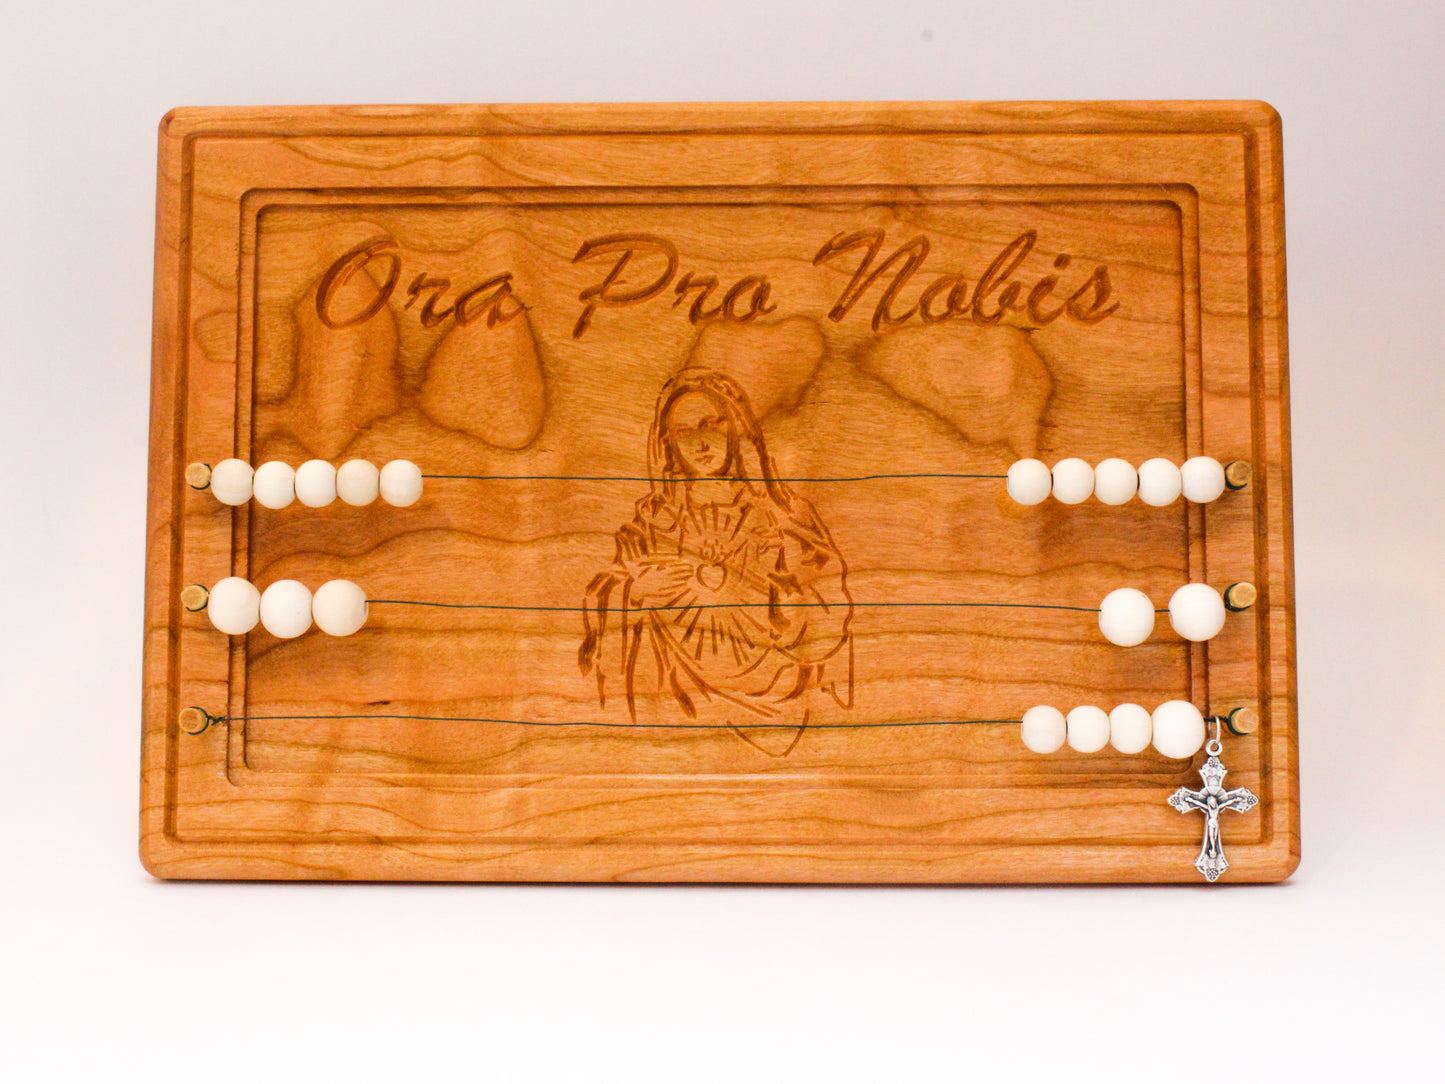 Hanging or standing abacus style kitchen rosary with Mary and the words Ora Pro Nobis.